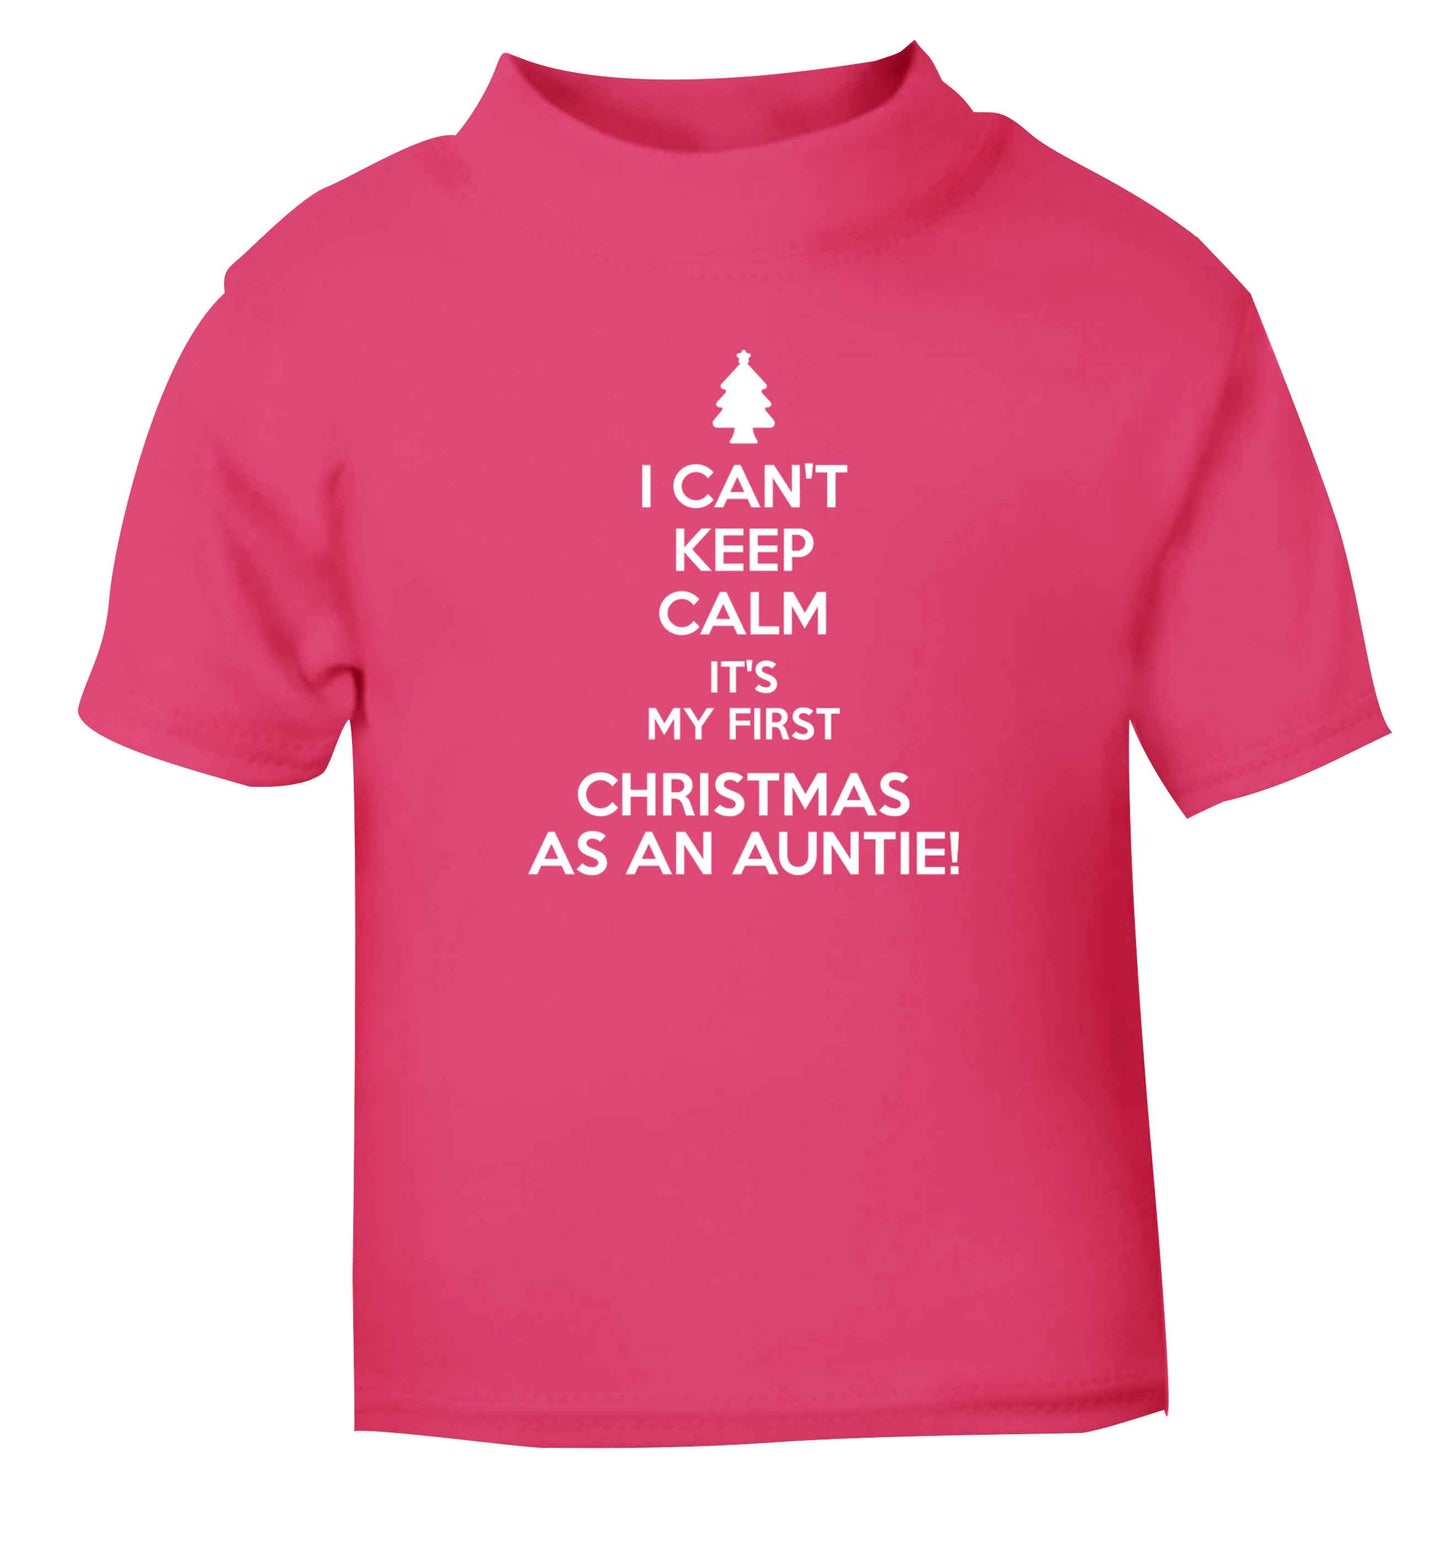 I can't keep calm it's my first Christmas as an auntie! pink Baby Toddler Tshirt 2 Years